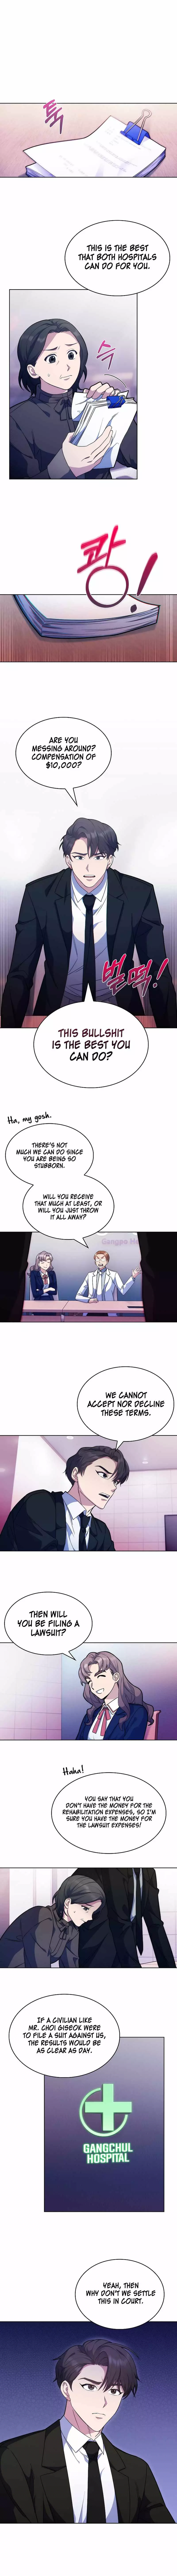 Level-Up Doctor (Manhwa) - 9 page 2-3571a365